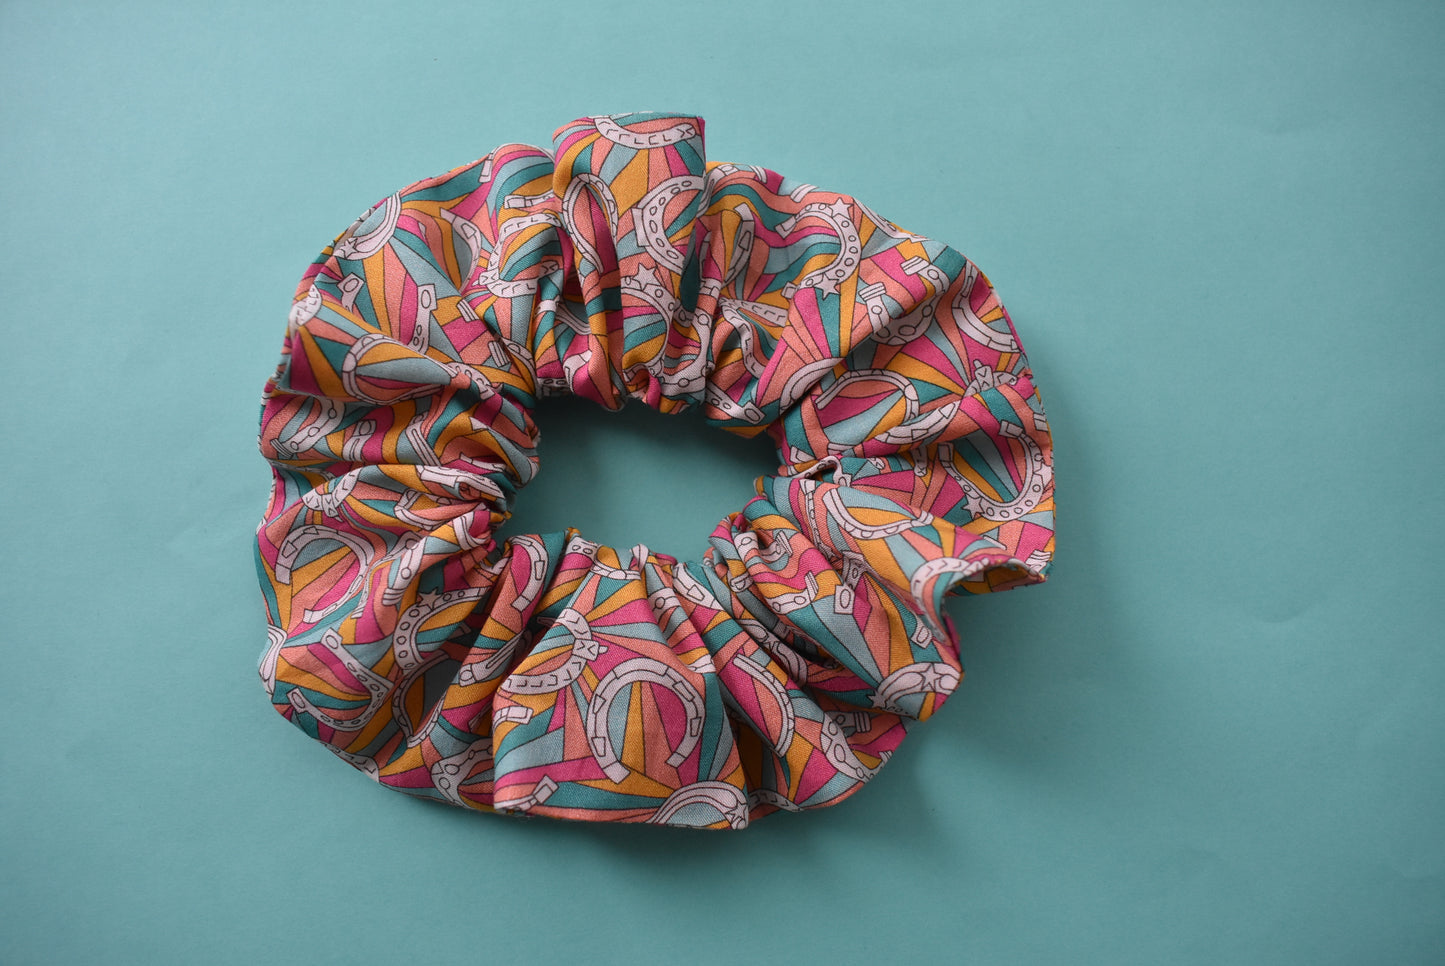 Scrunchie - Liberty of London  Derby Day